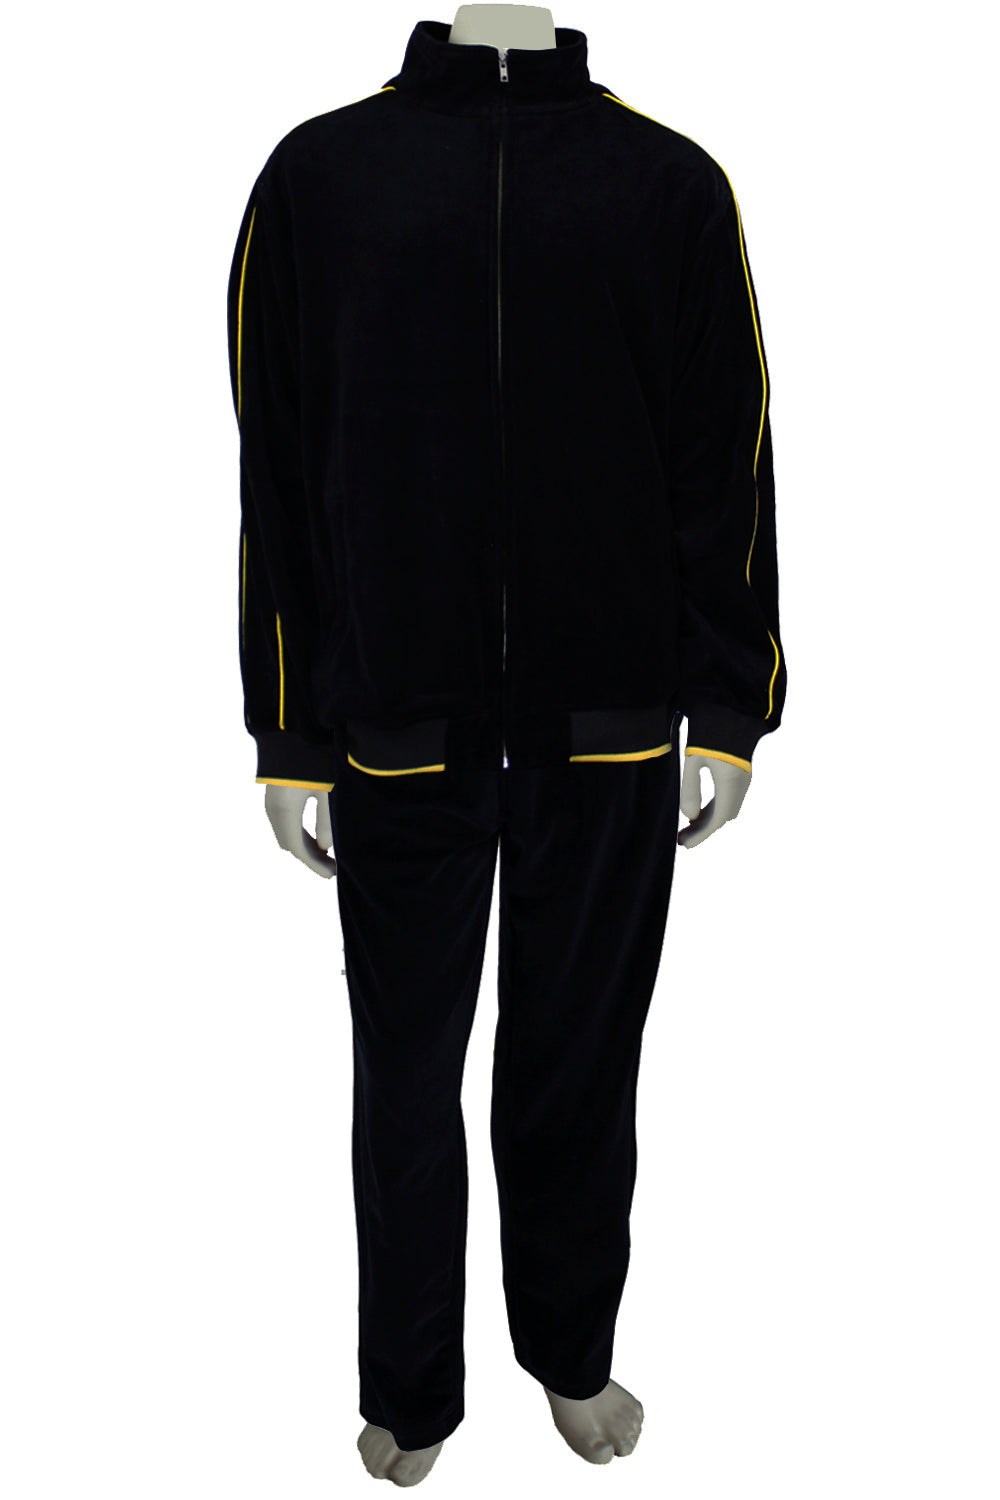 Mens Black Velour Tracksuit with Yellow Piping